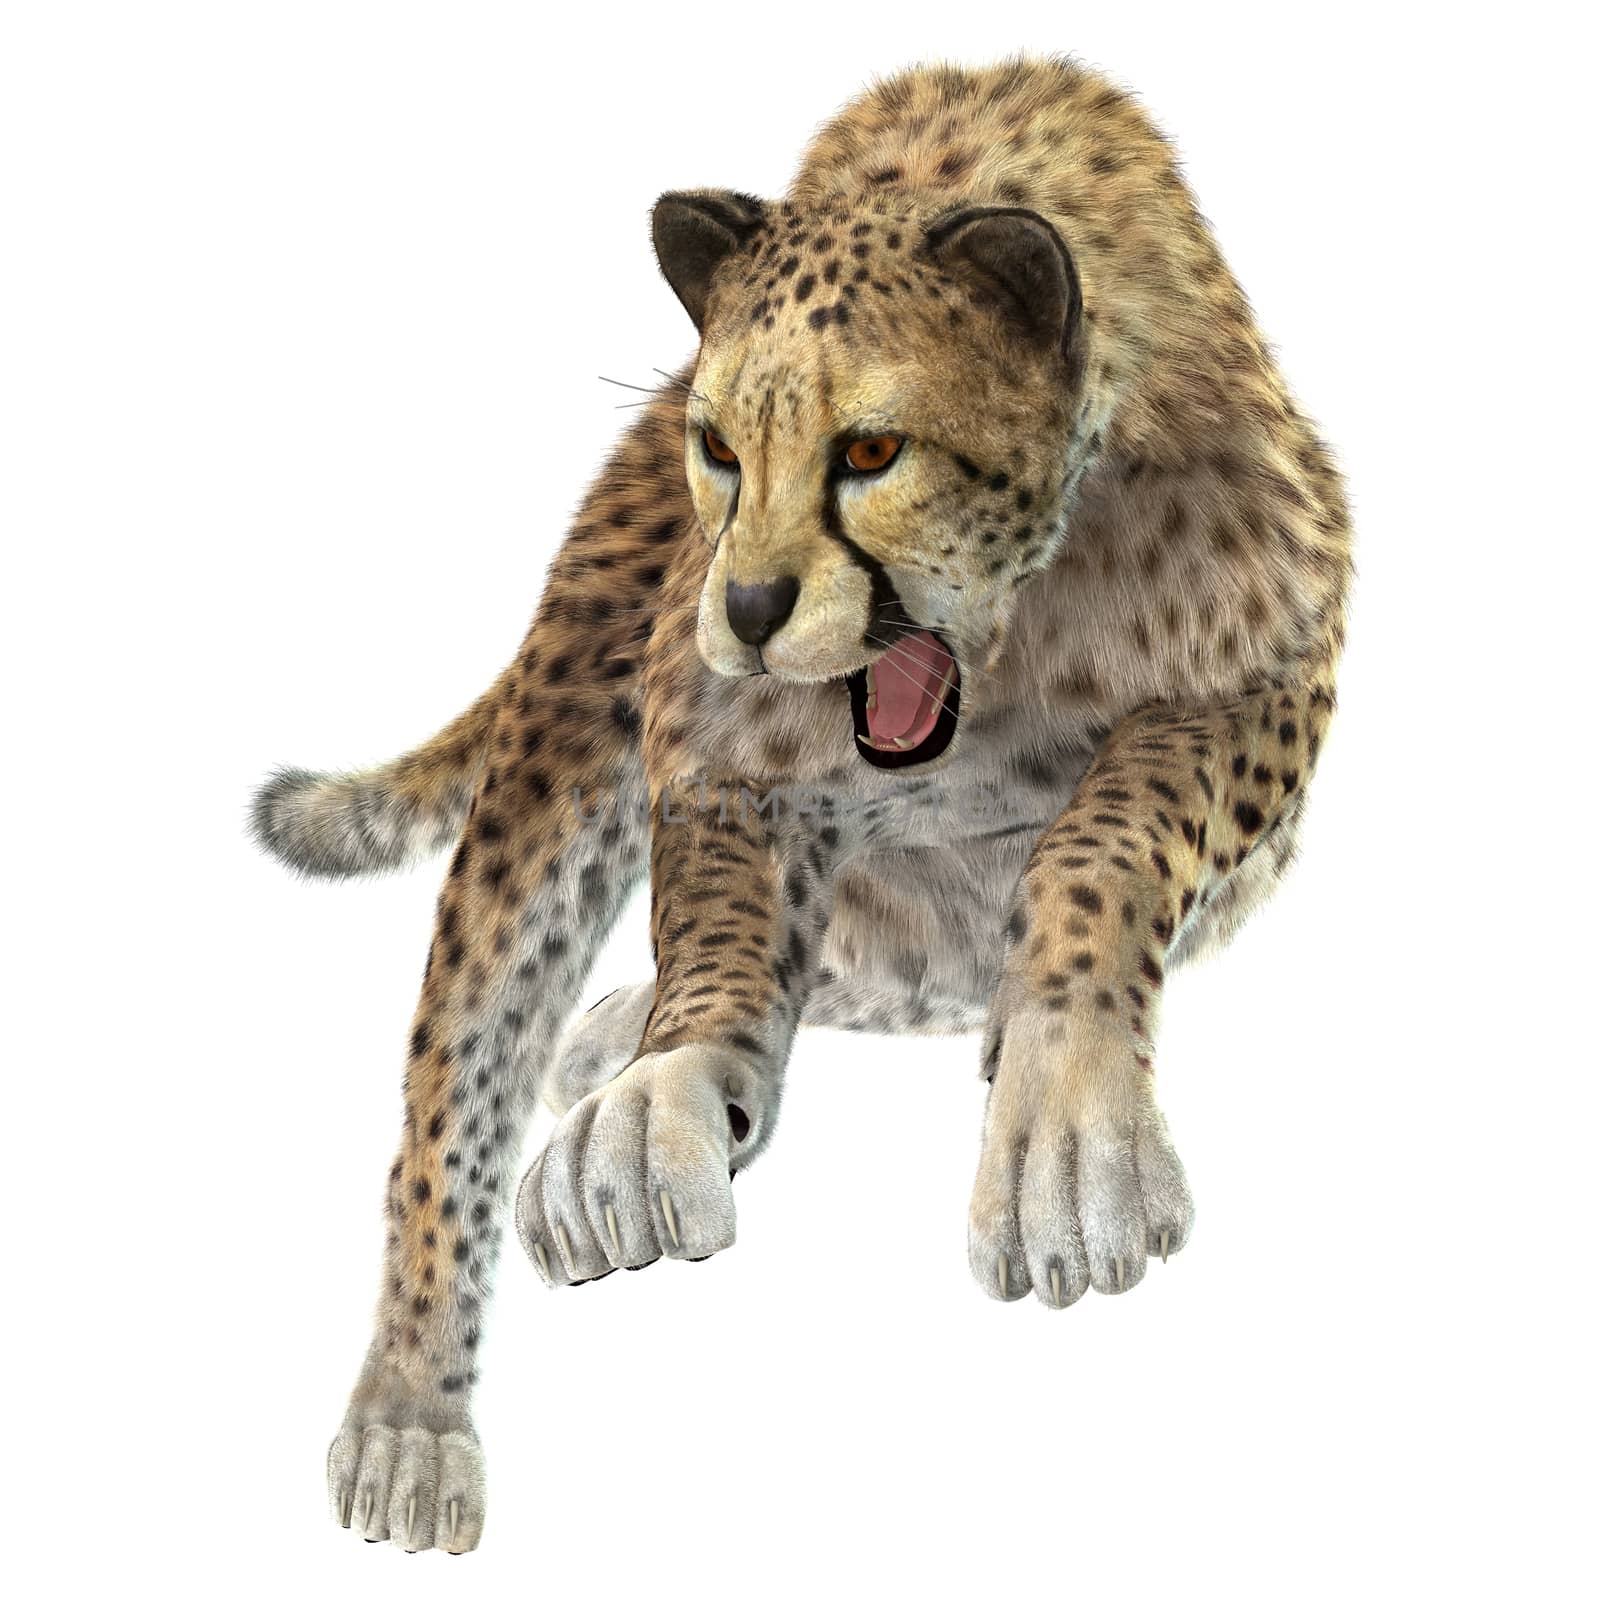 3D digital render of a hunting cheetah isolated on white background